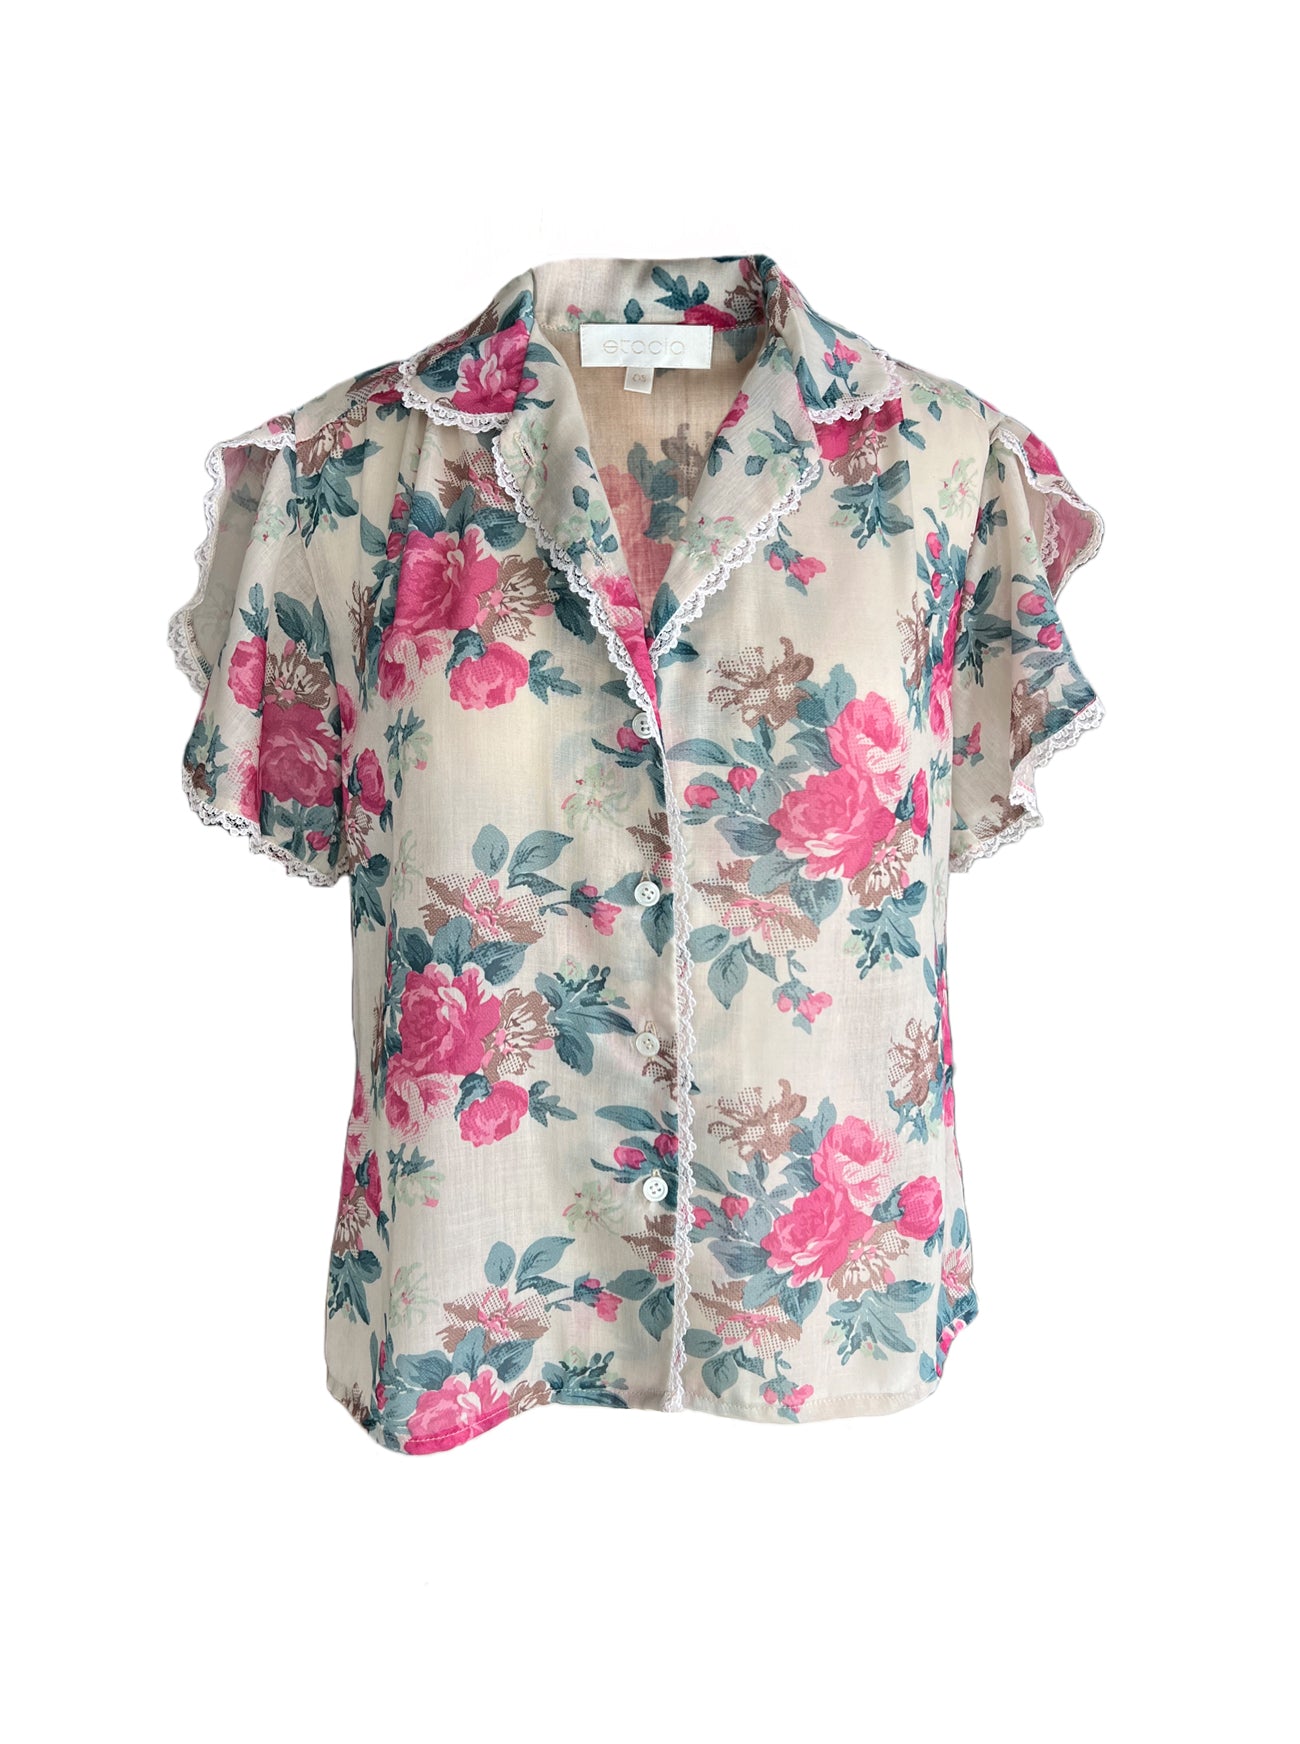 rosemary garden print blouse front view